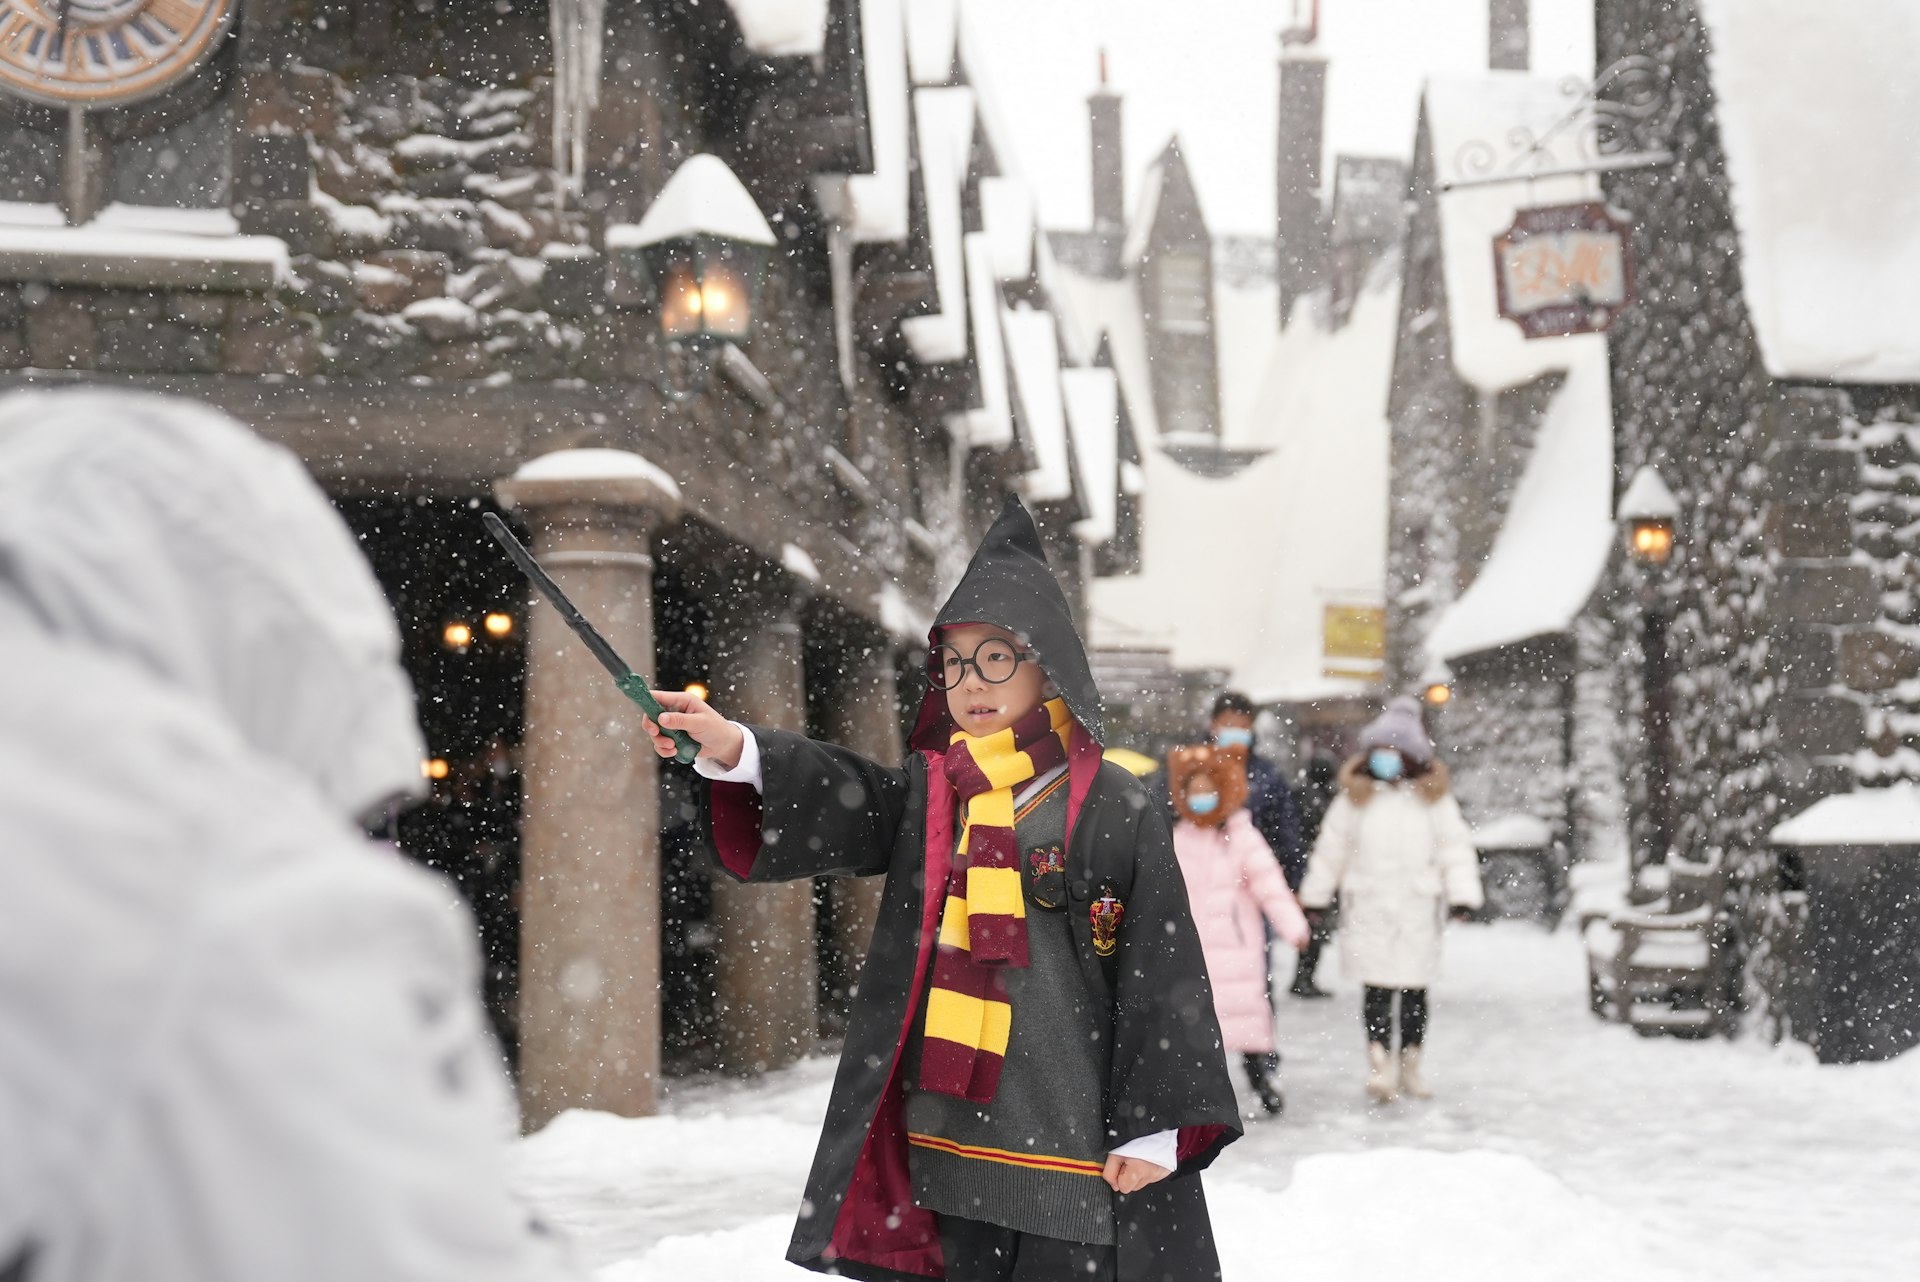 A child dressed as Harry Potter holds a wand in the snow at Universal Studios, Beijing, China